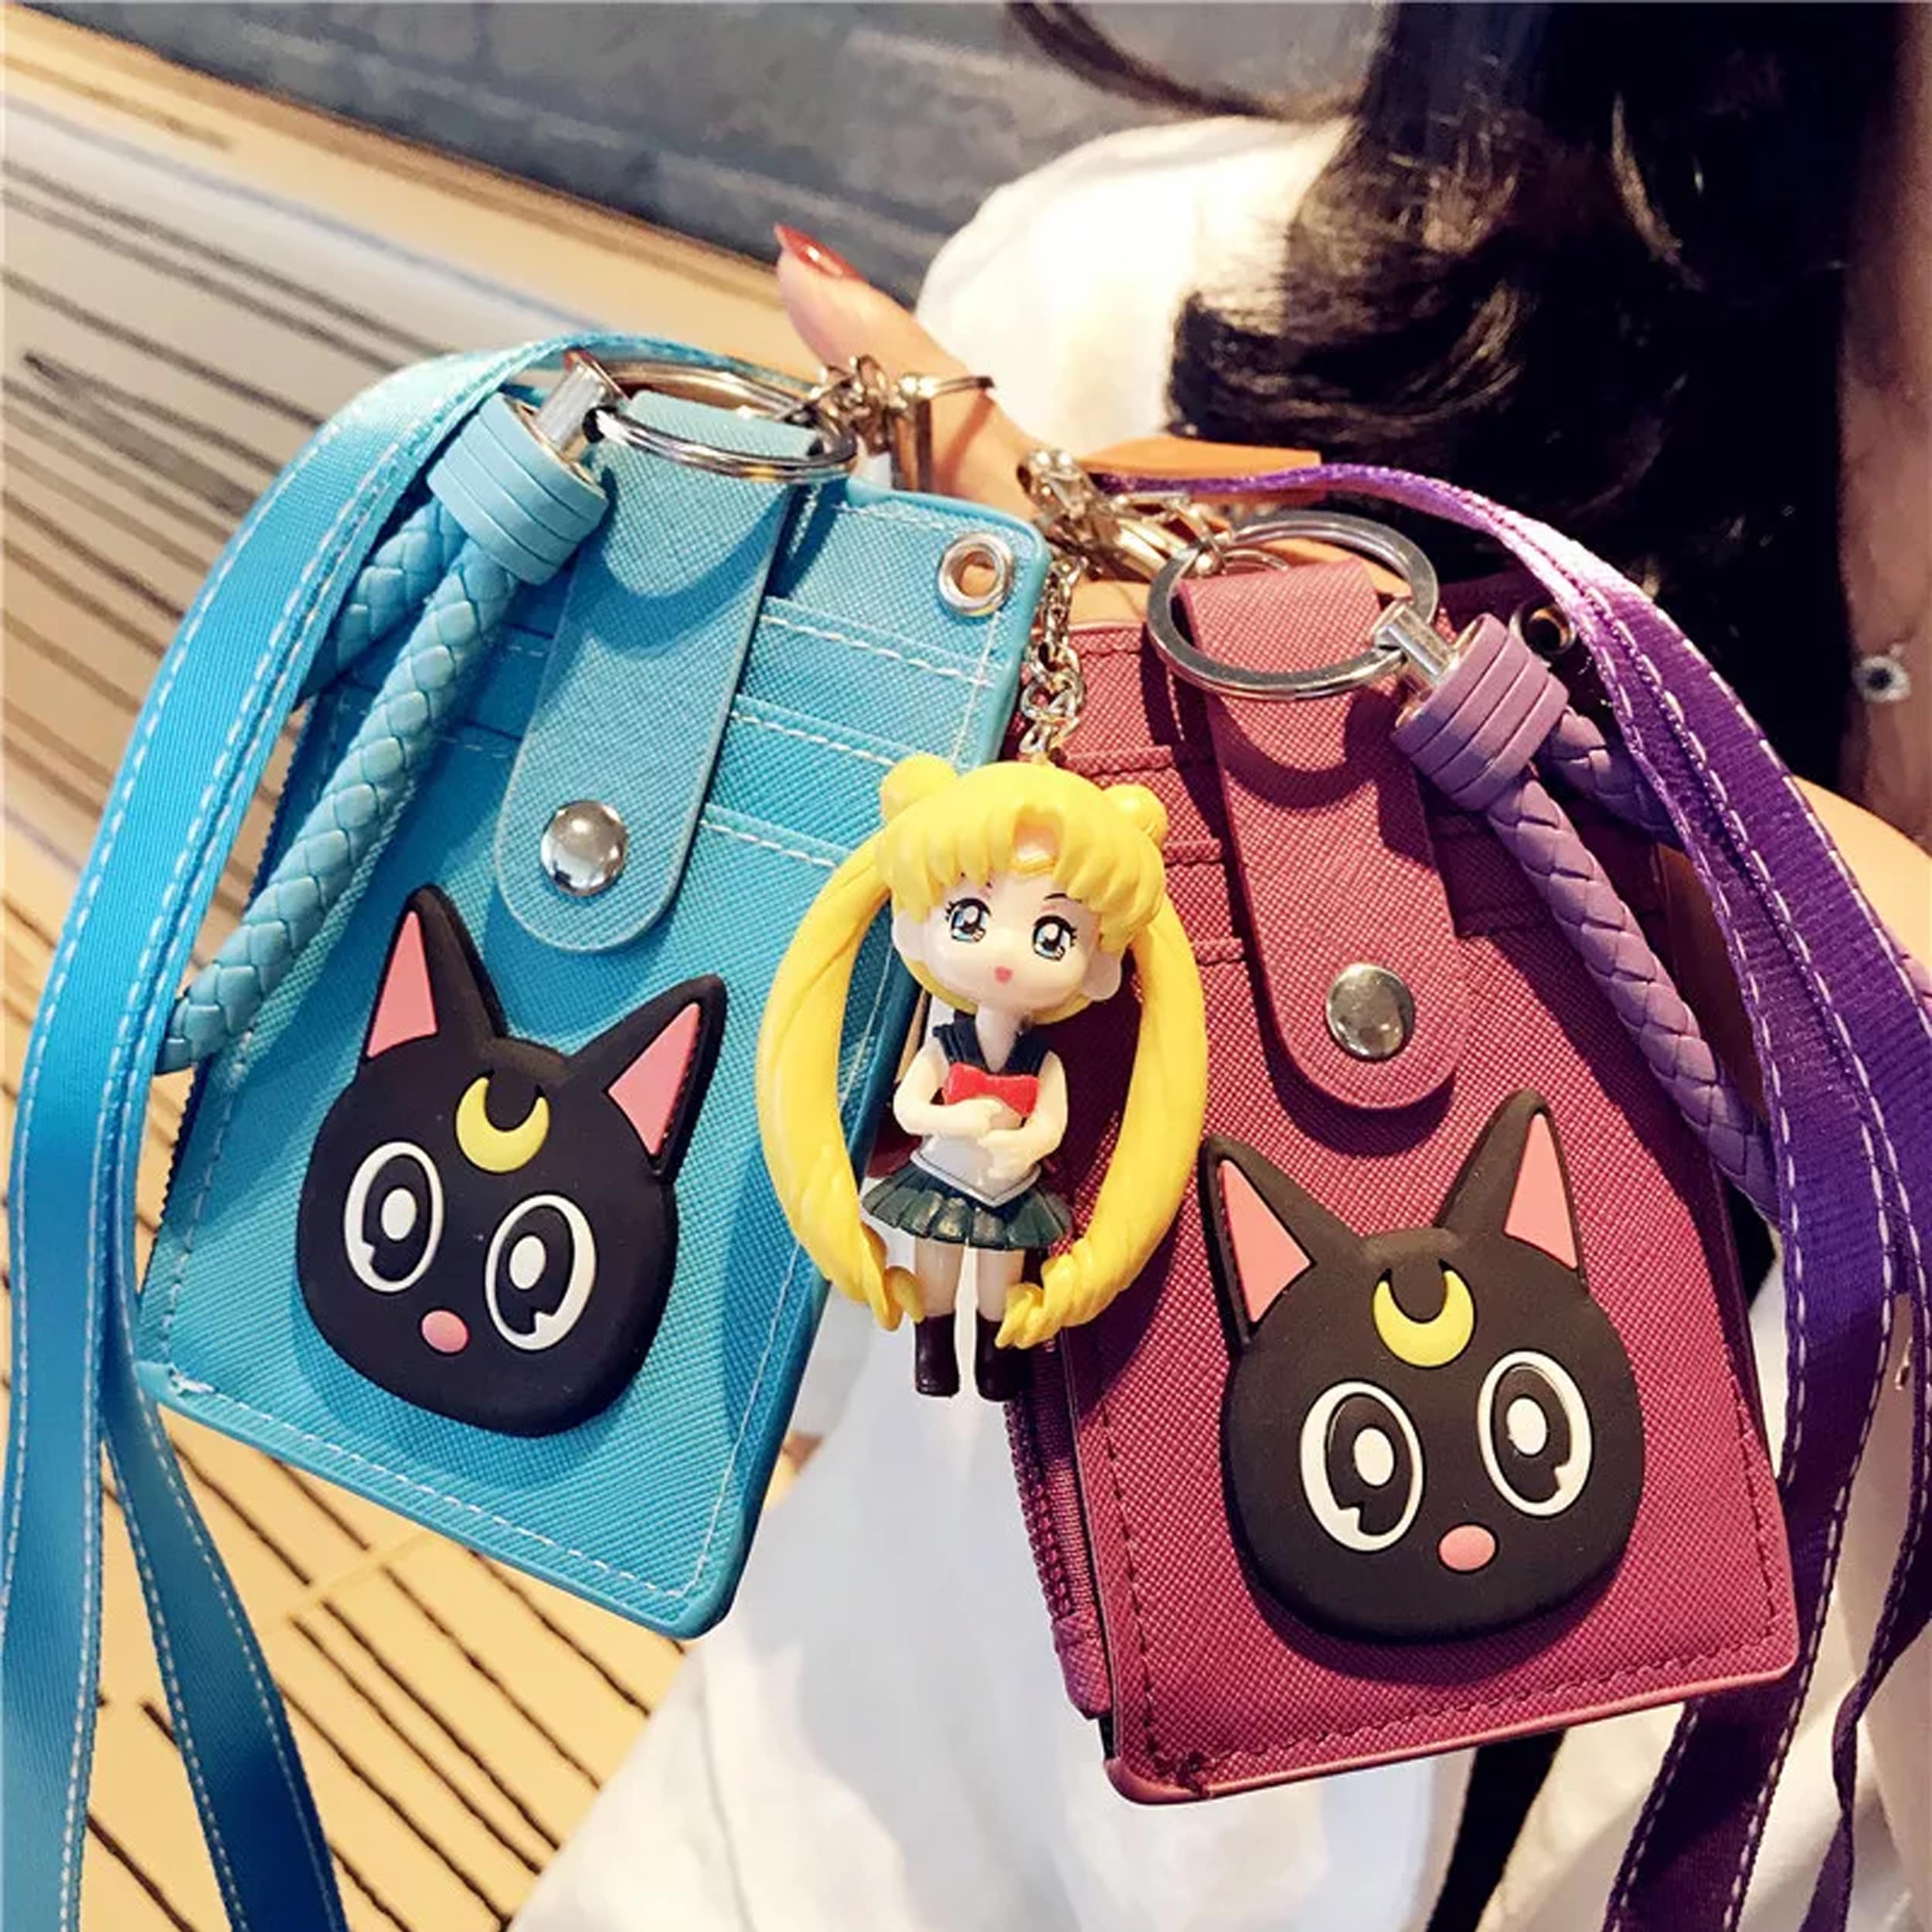 Pocket IDs Bag With Keychains